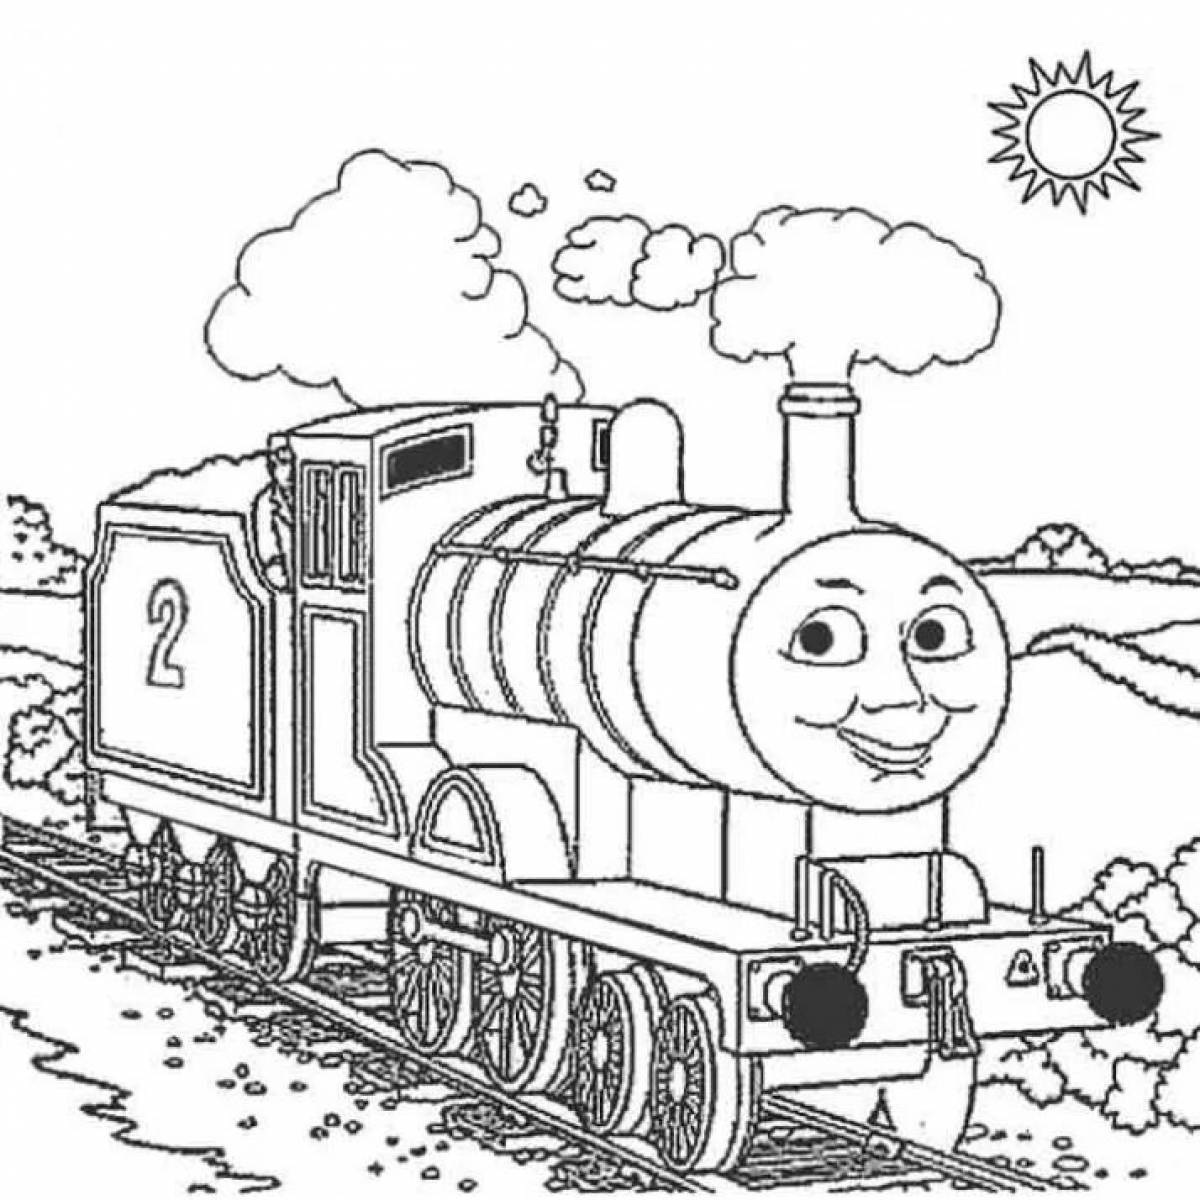 Thomas spider awesome coloring page